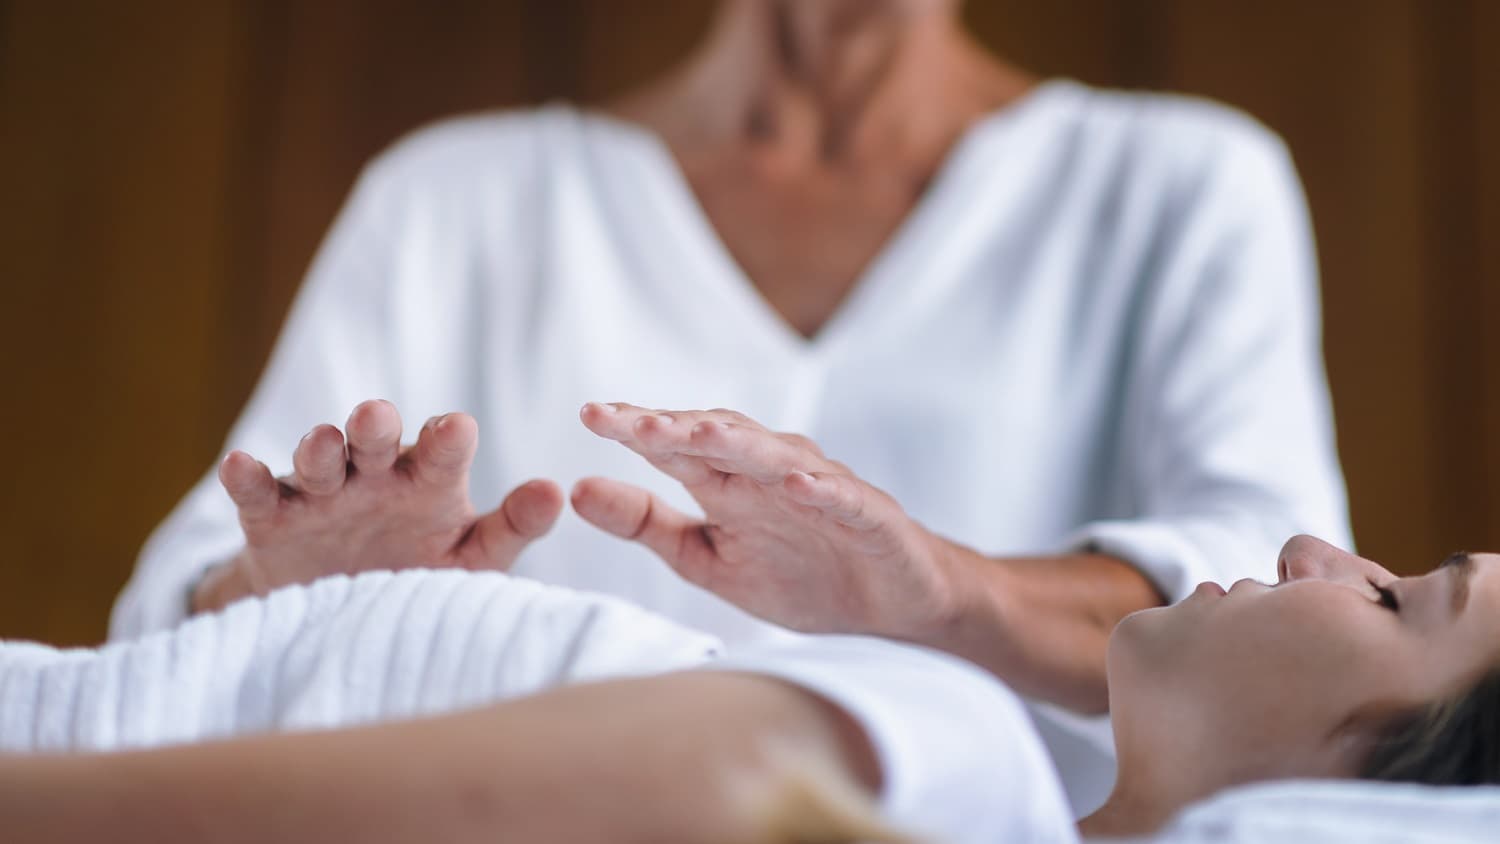 What is reiki healing?